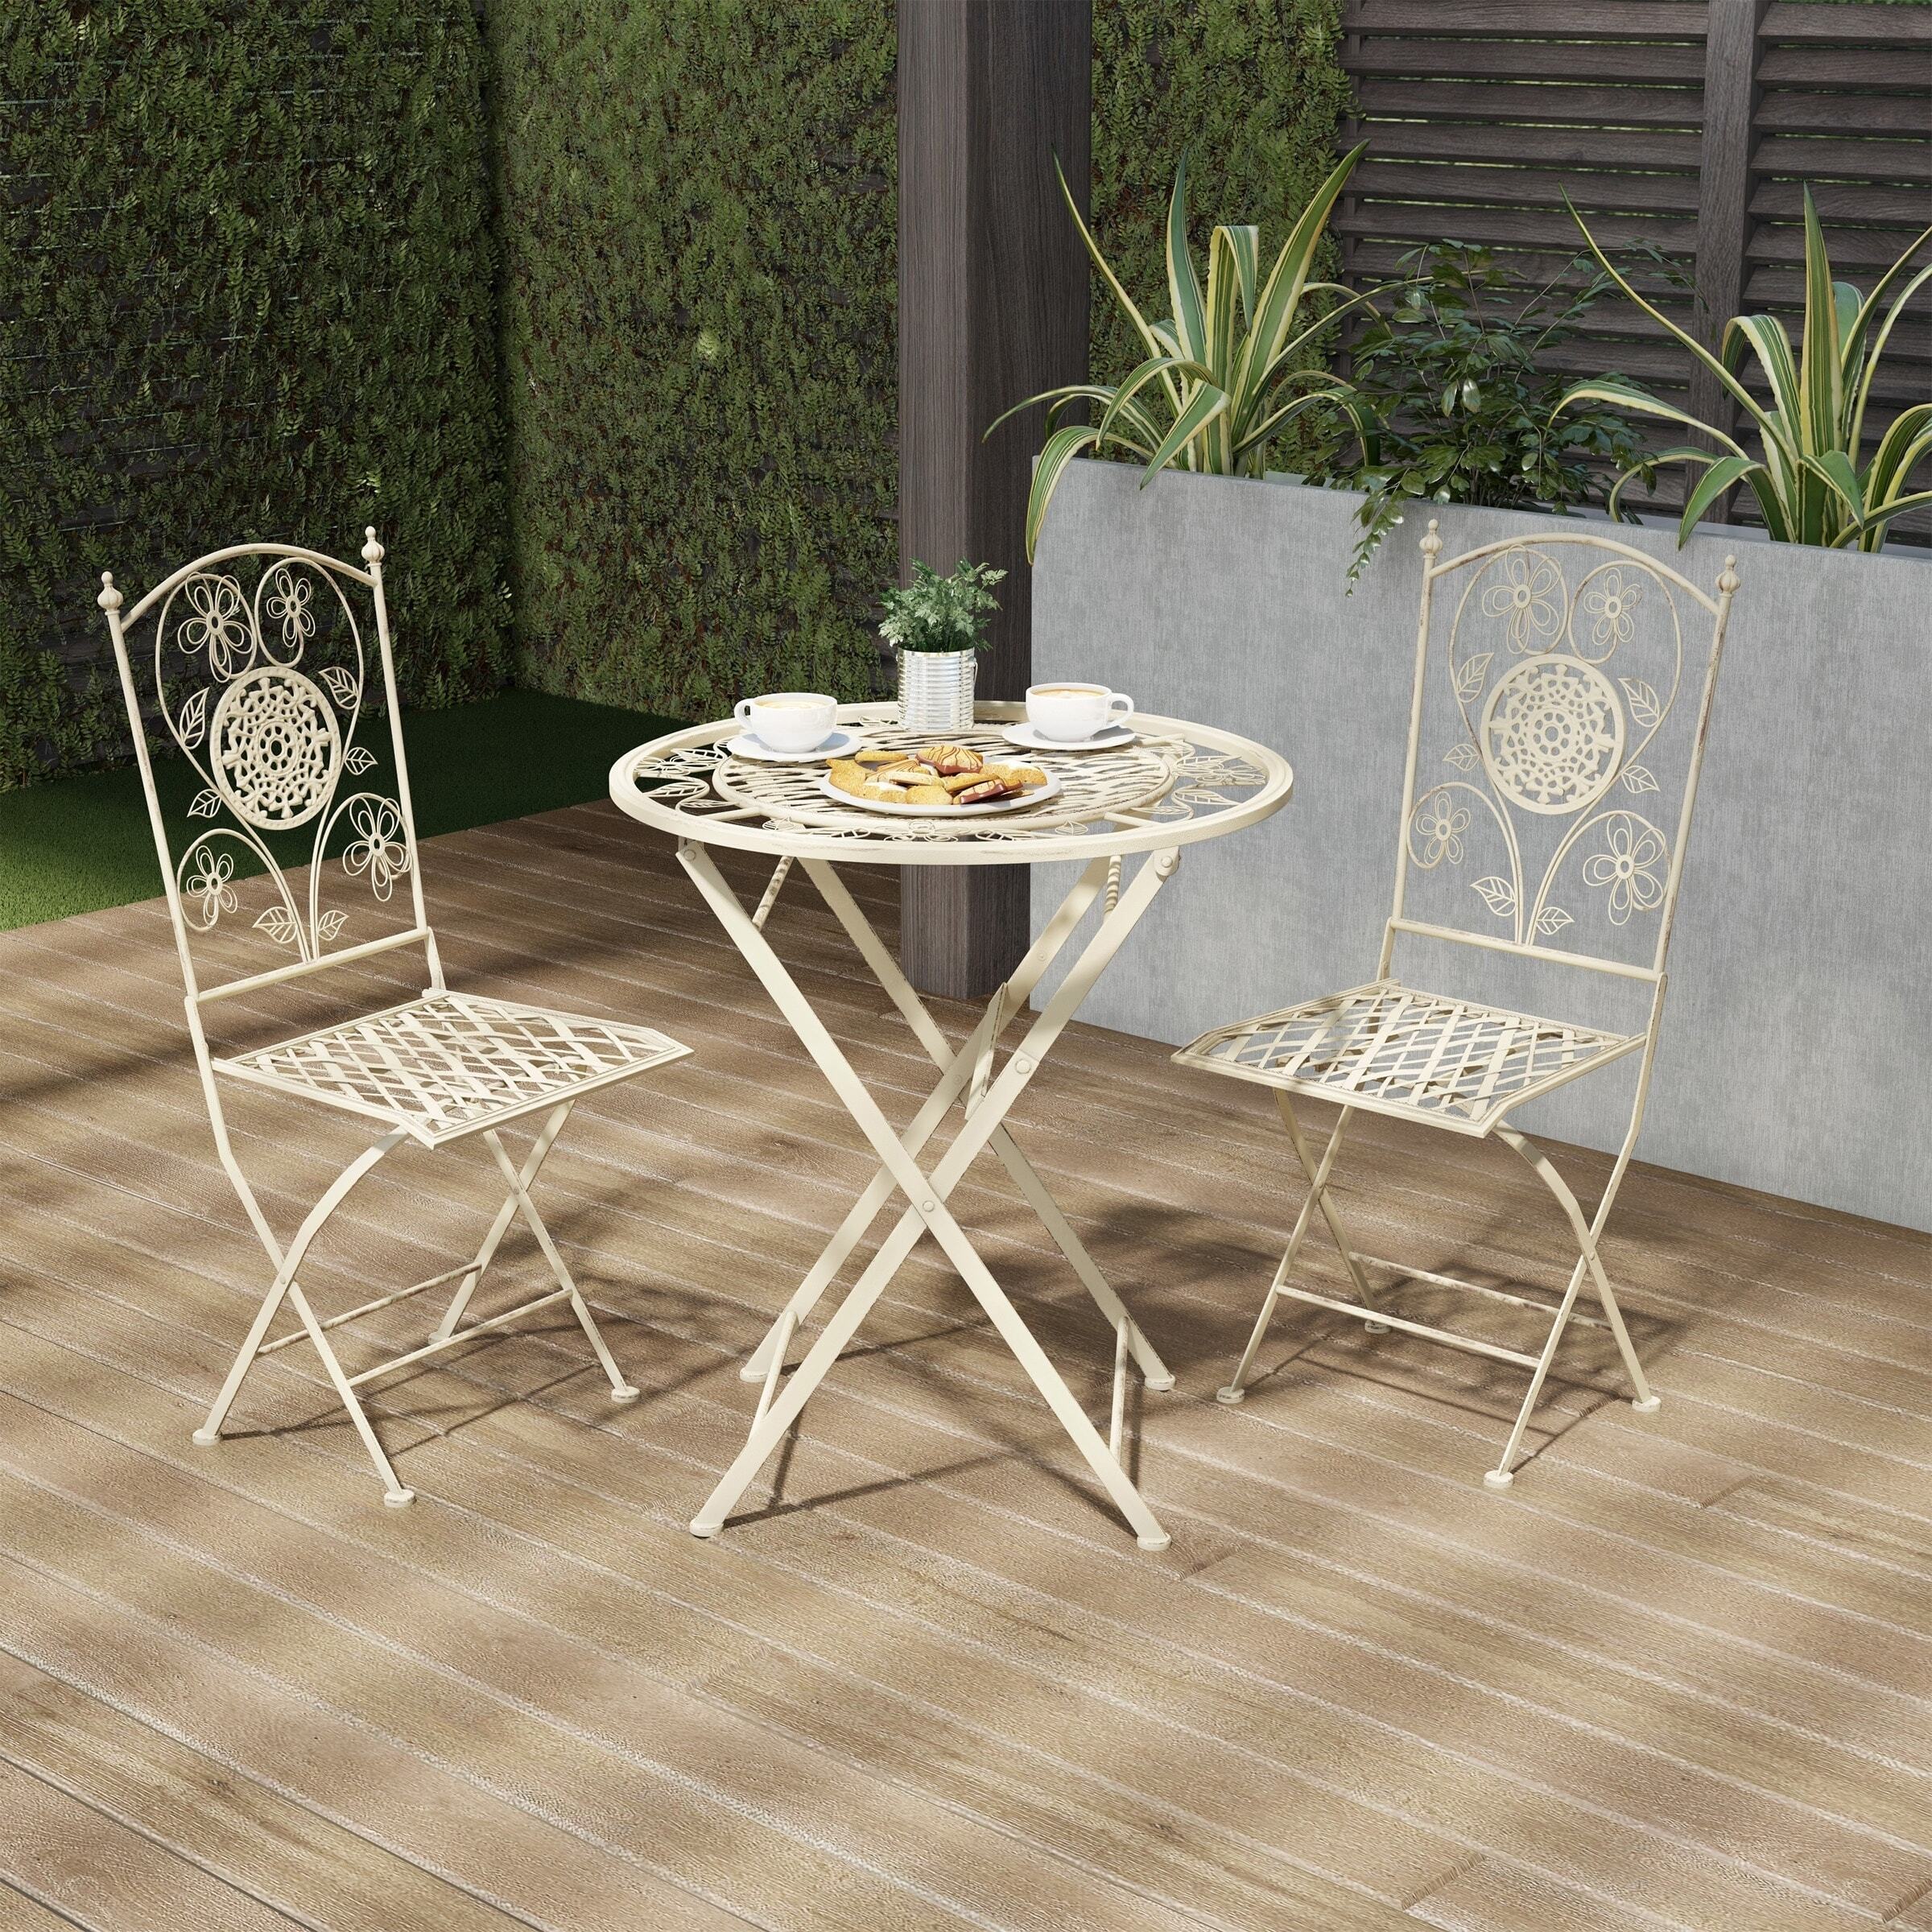 Outdoor White Wrought Iron Folding Table and Chairs